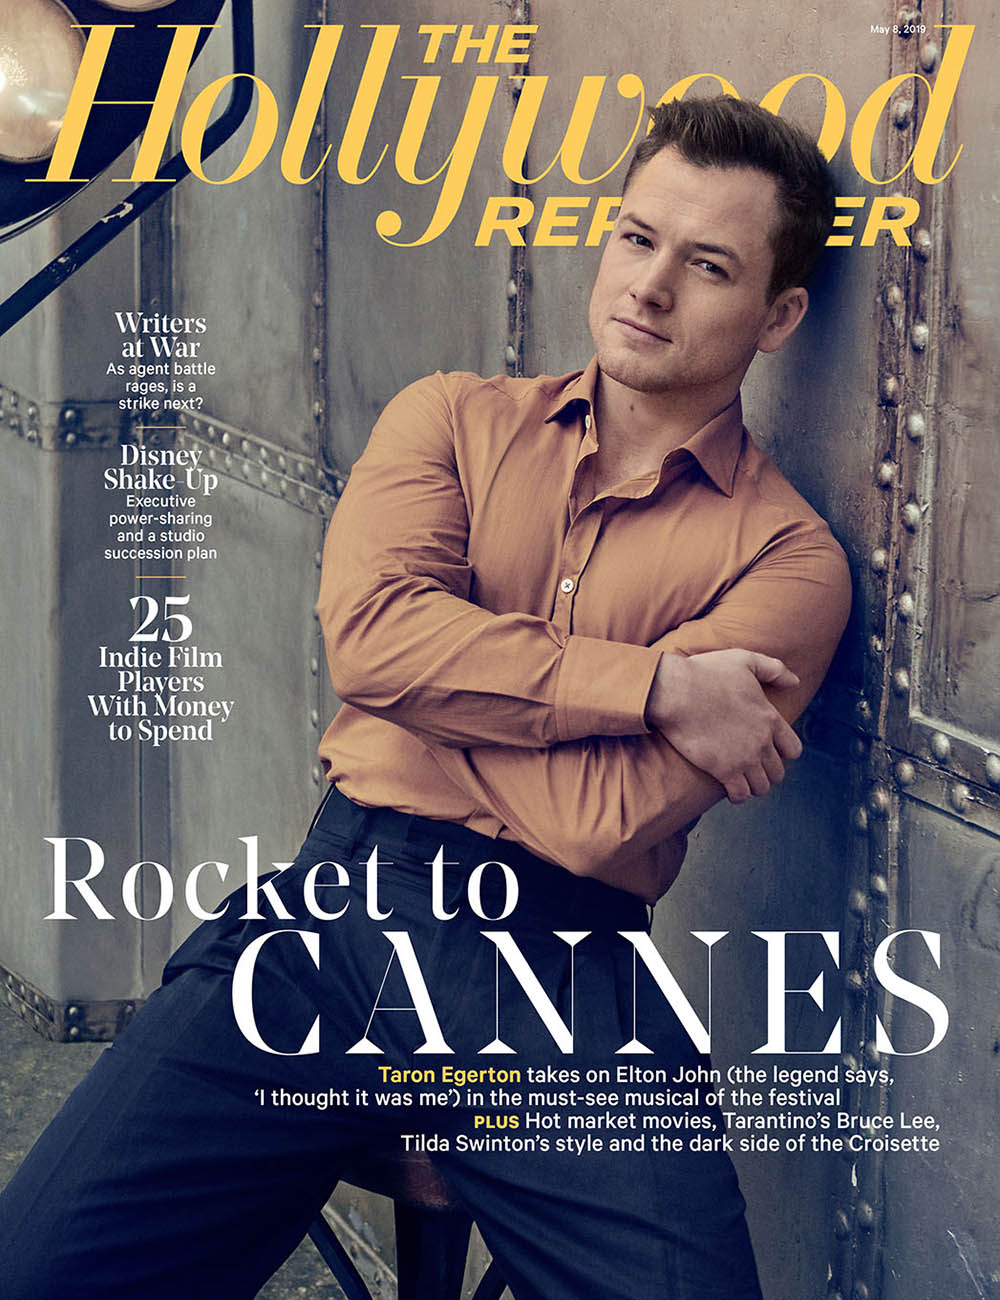 Taron Egerton covers The Hollywood Reporter May 8th, 2019 by Ruven Afanador